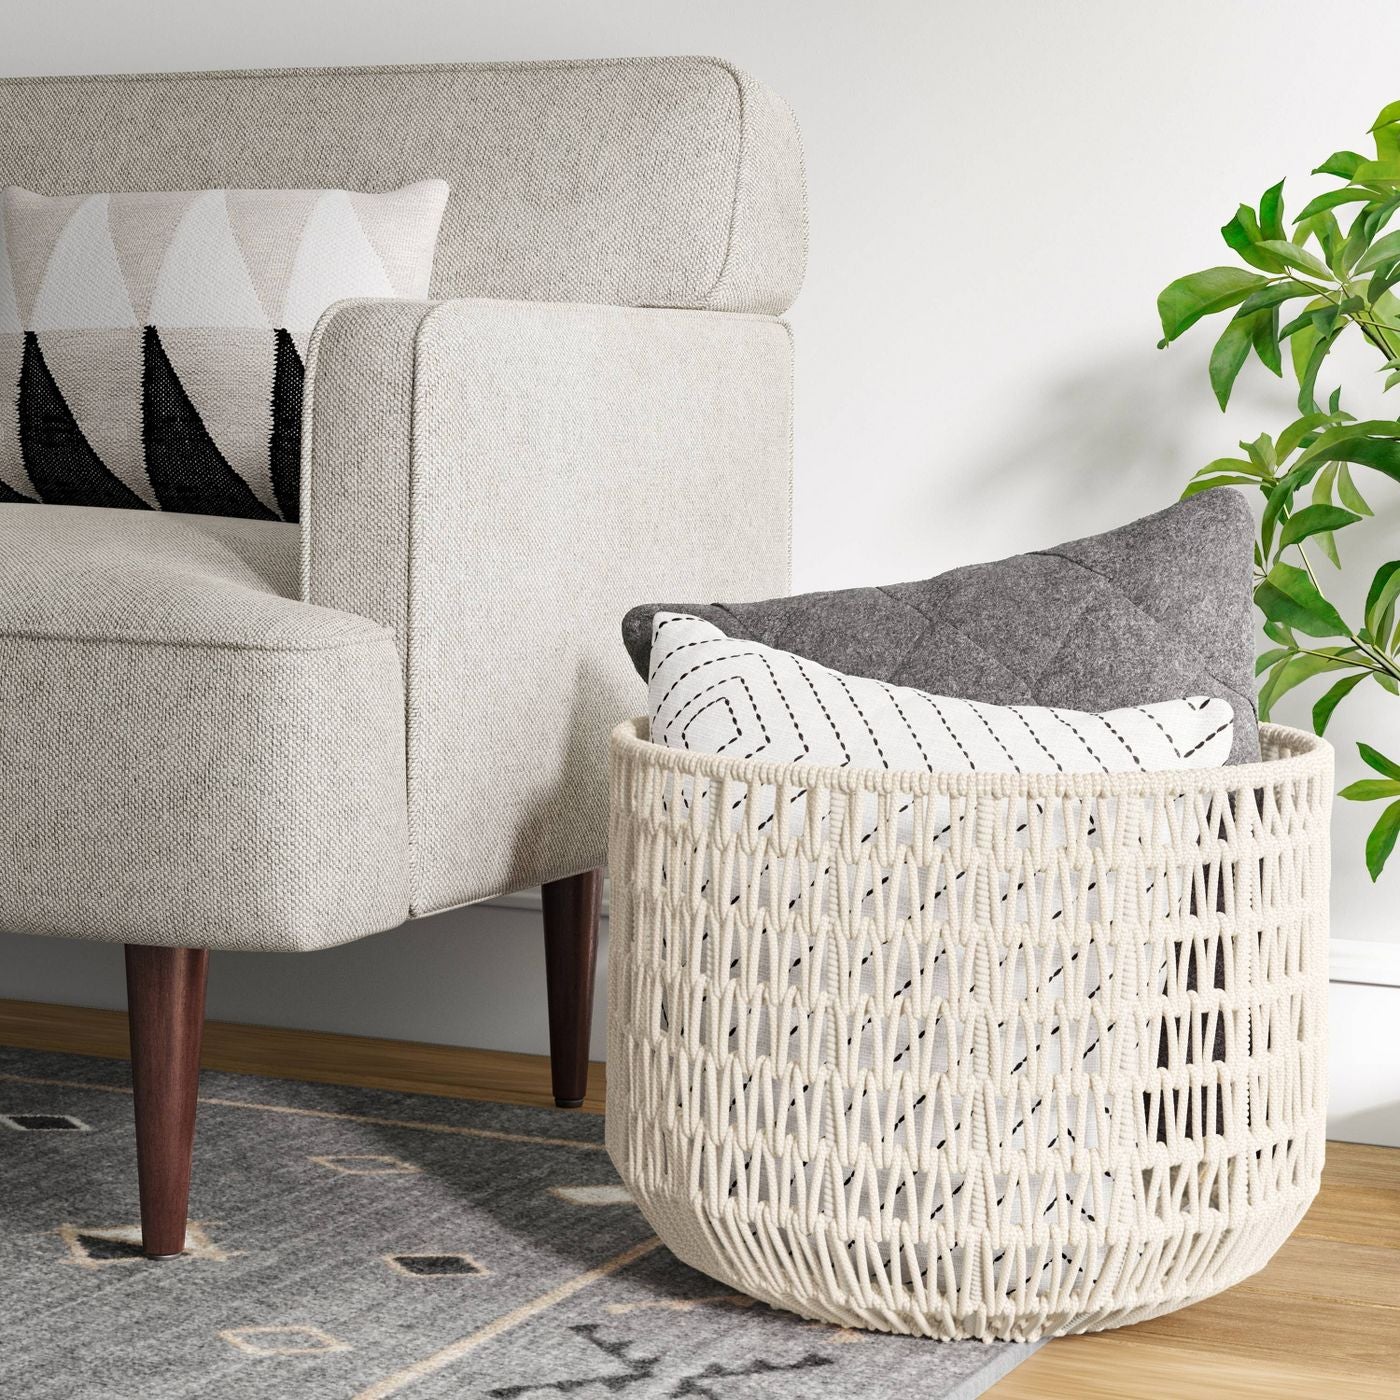 the woven rope basket in white sitting next to a couch with pillows in it